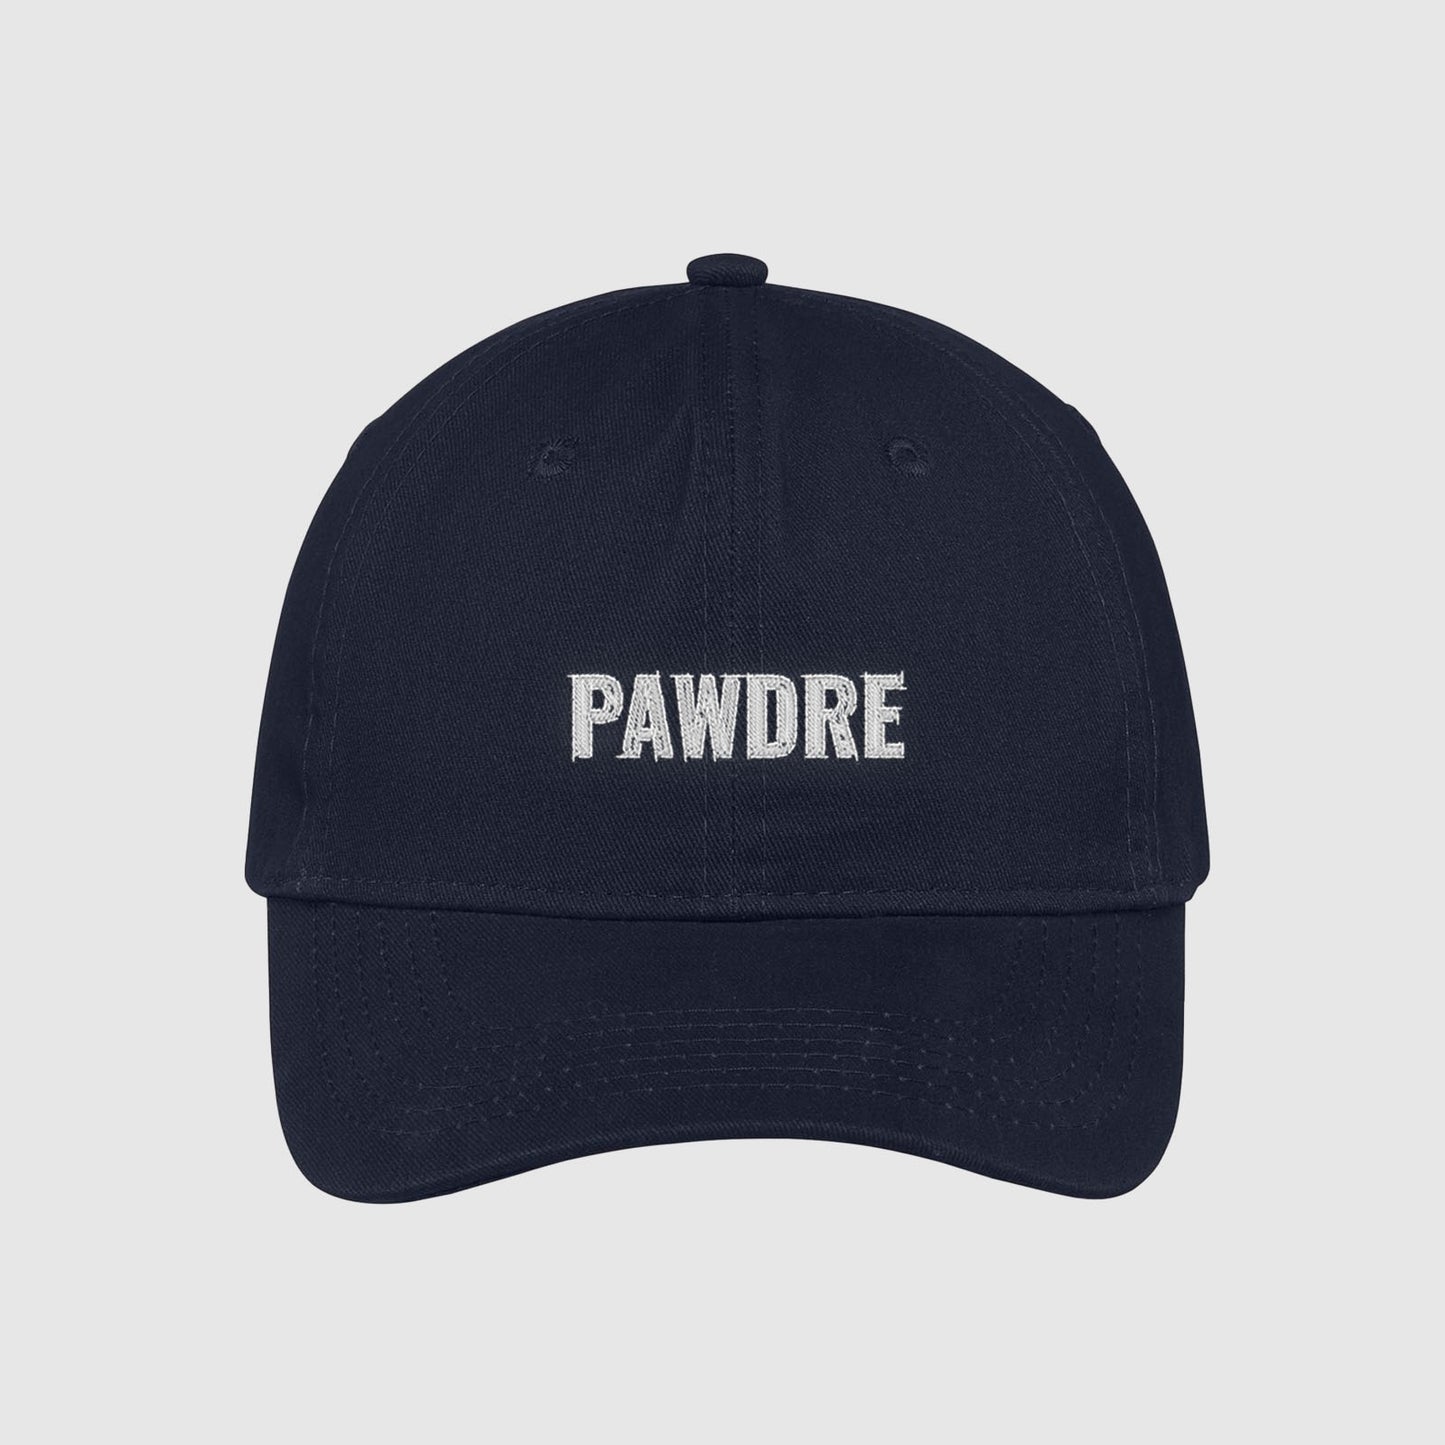 Navy Pawdre Hat embroidered with white text.